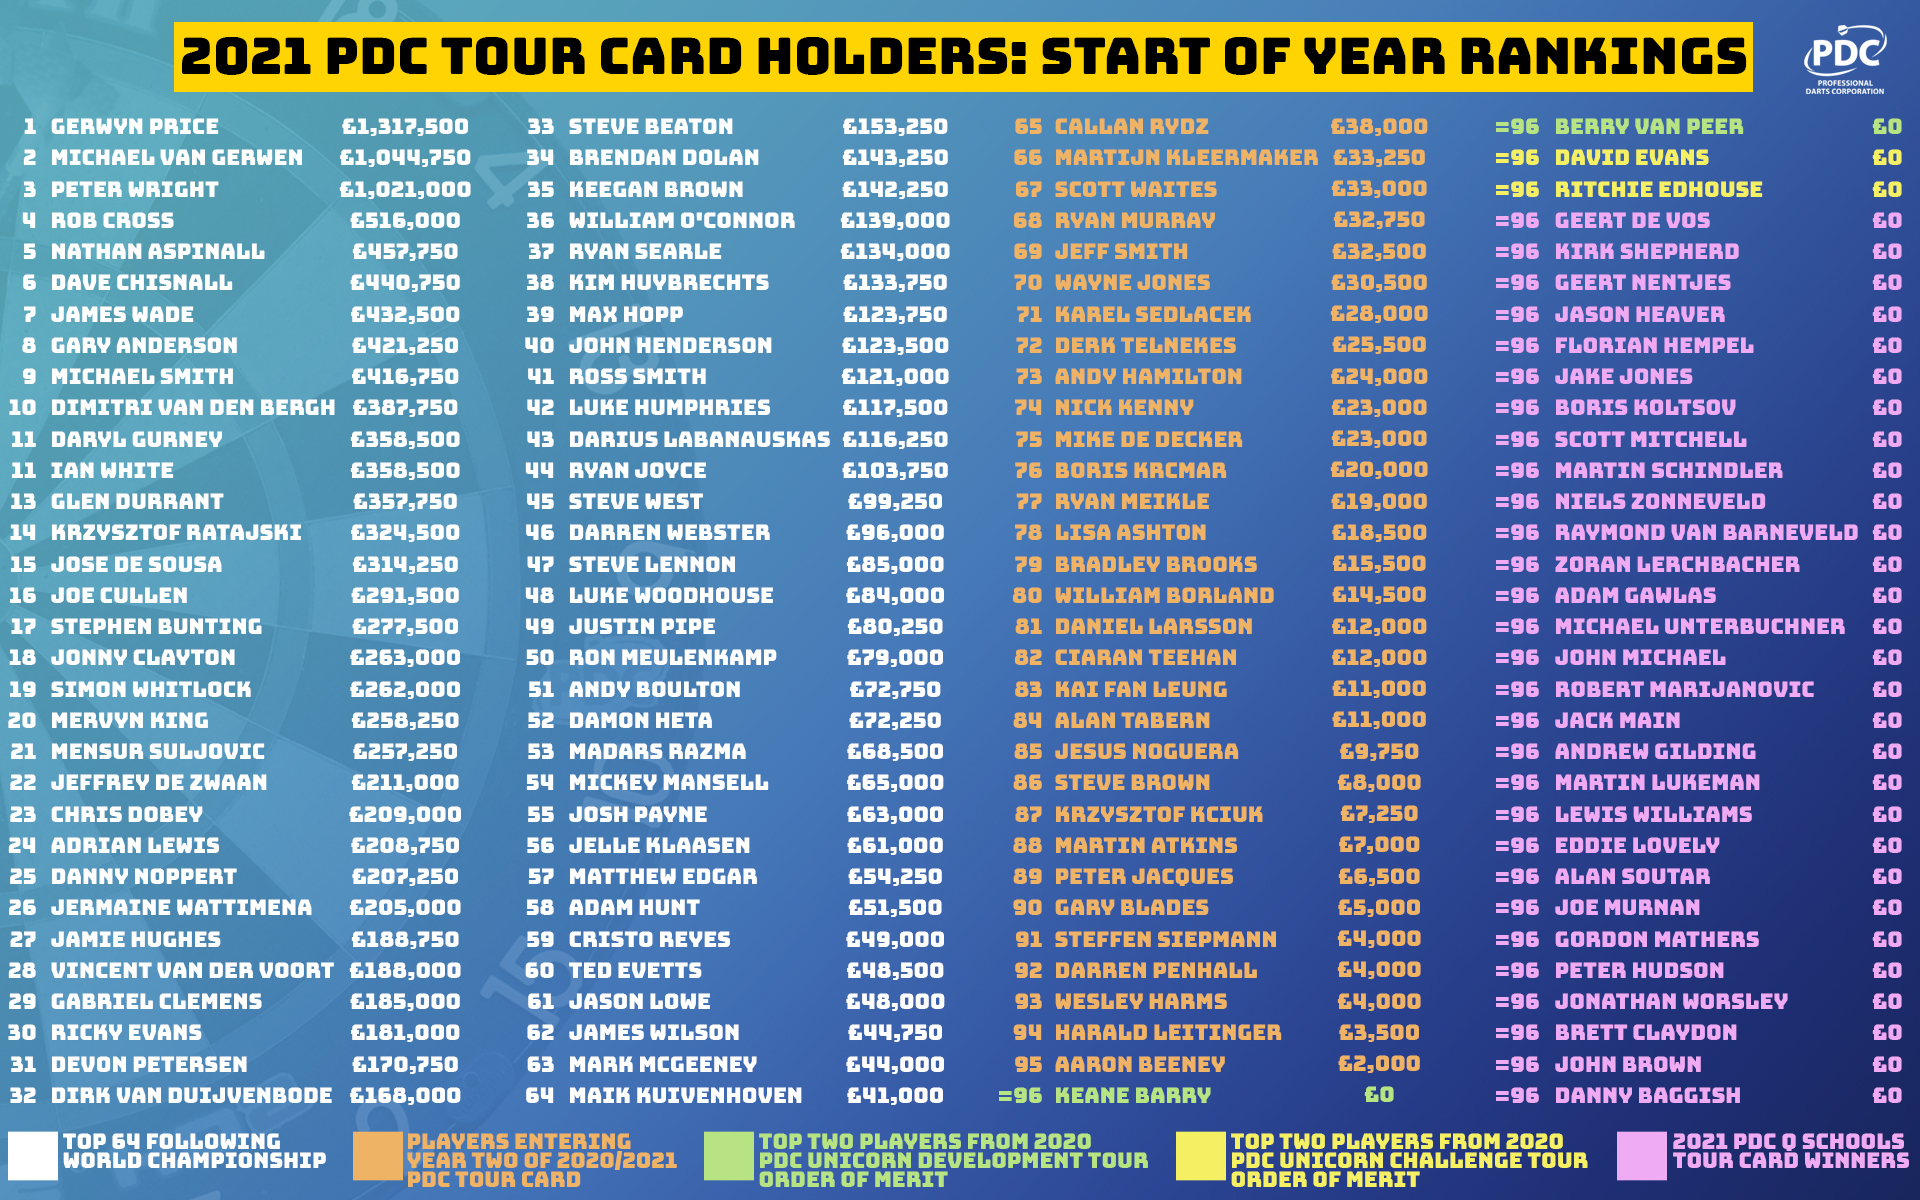 PDC Darts on Twitter: "🔢𝙍𝙖𝙣𝙠𝙞𝙣𝙜𝙨 𝙖𝙝𝙚𝙖𝙙 𝙤𝙛 𝙣𝙚𝙬 𝙨𝙚𝙖𝙨𝙤𝙣 We've listed 128 PDC Card Holders in current ranking order ahead of Thursday's start the 2021 season. Full story➡️ https://t.co/Otxz3vAgLQ